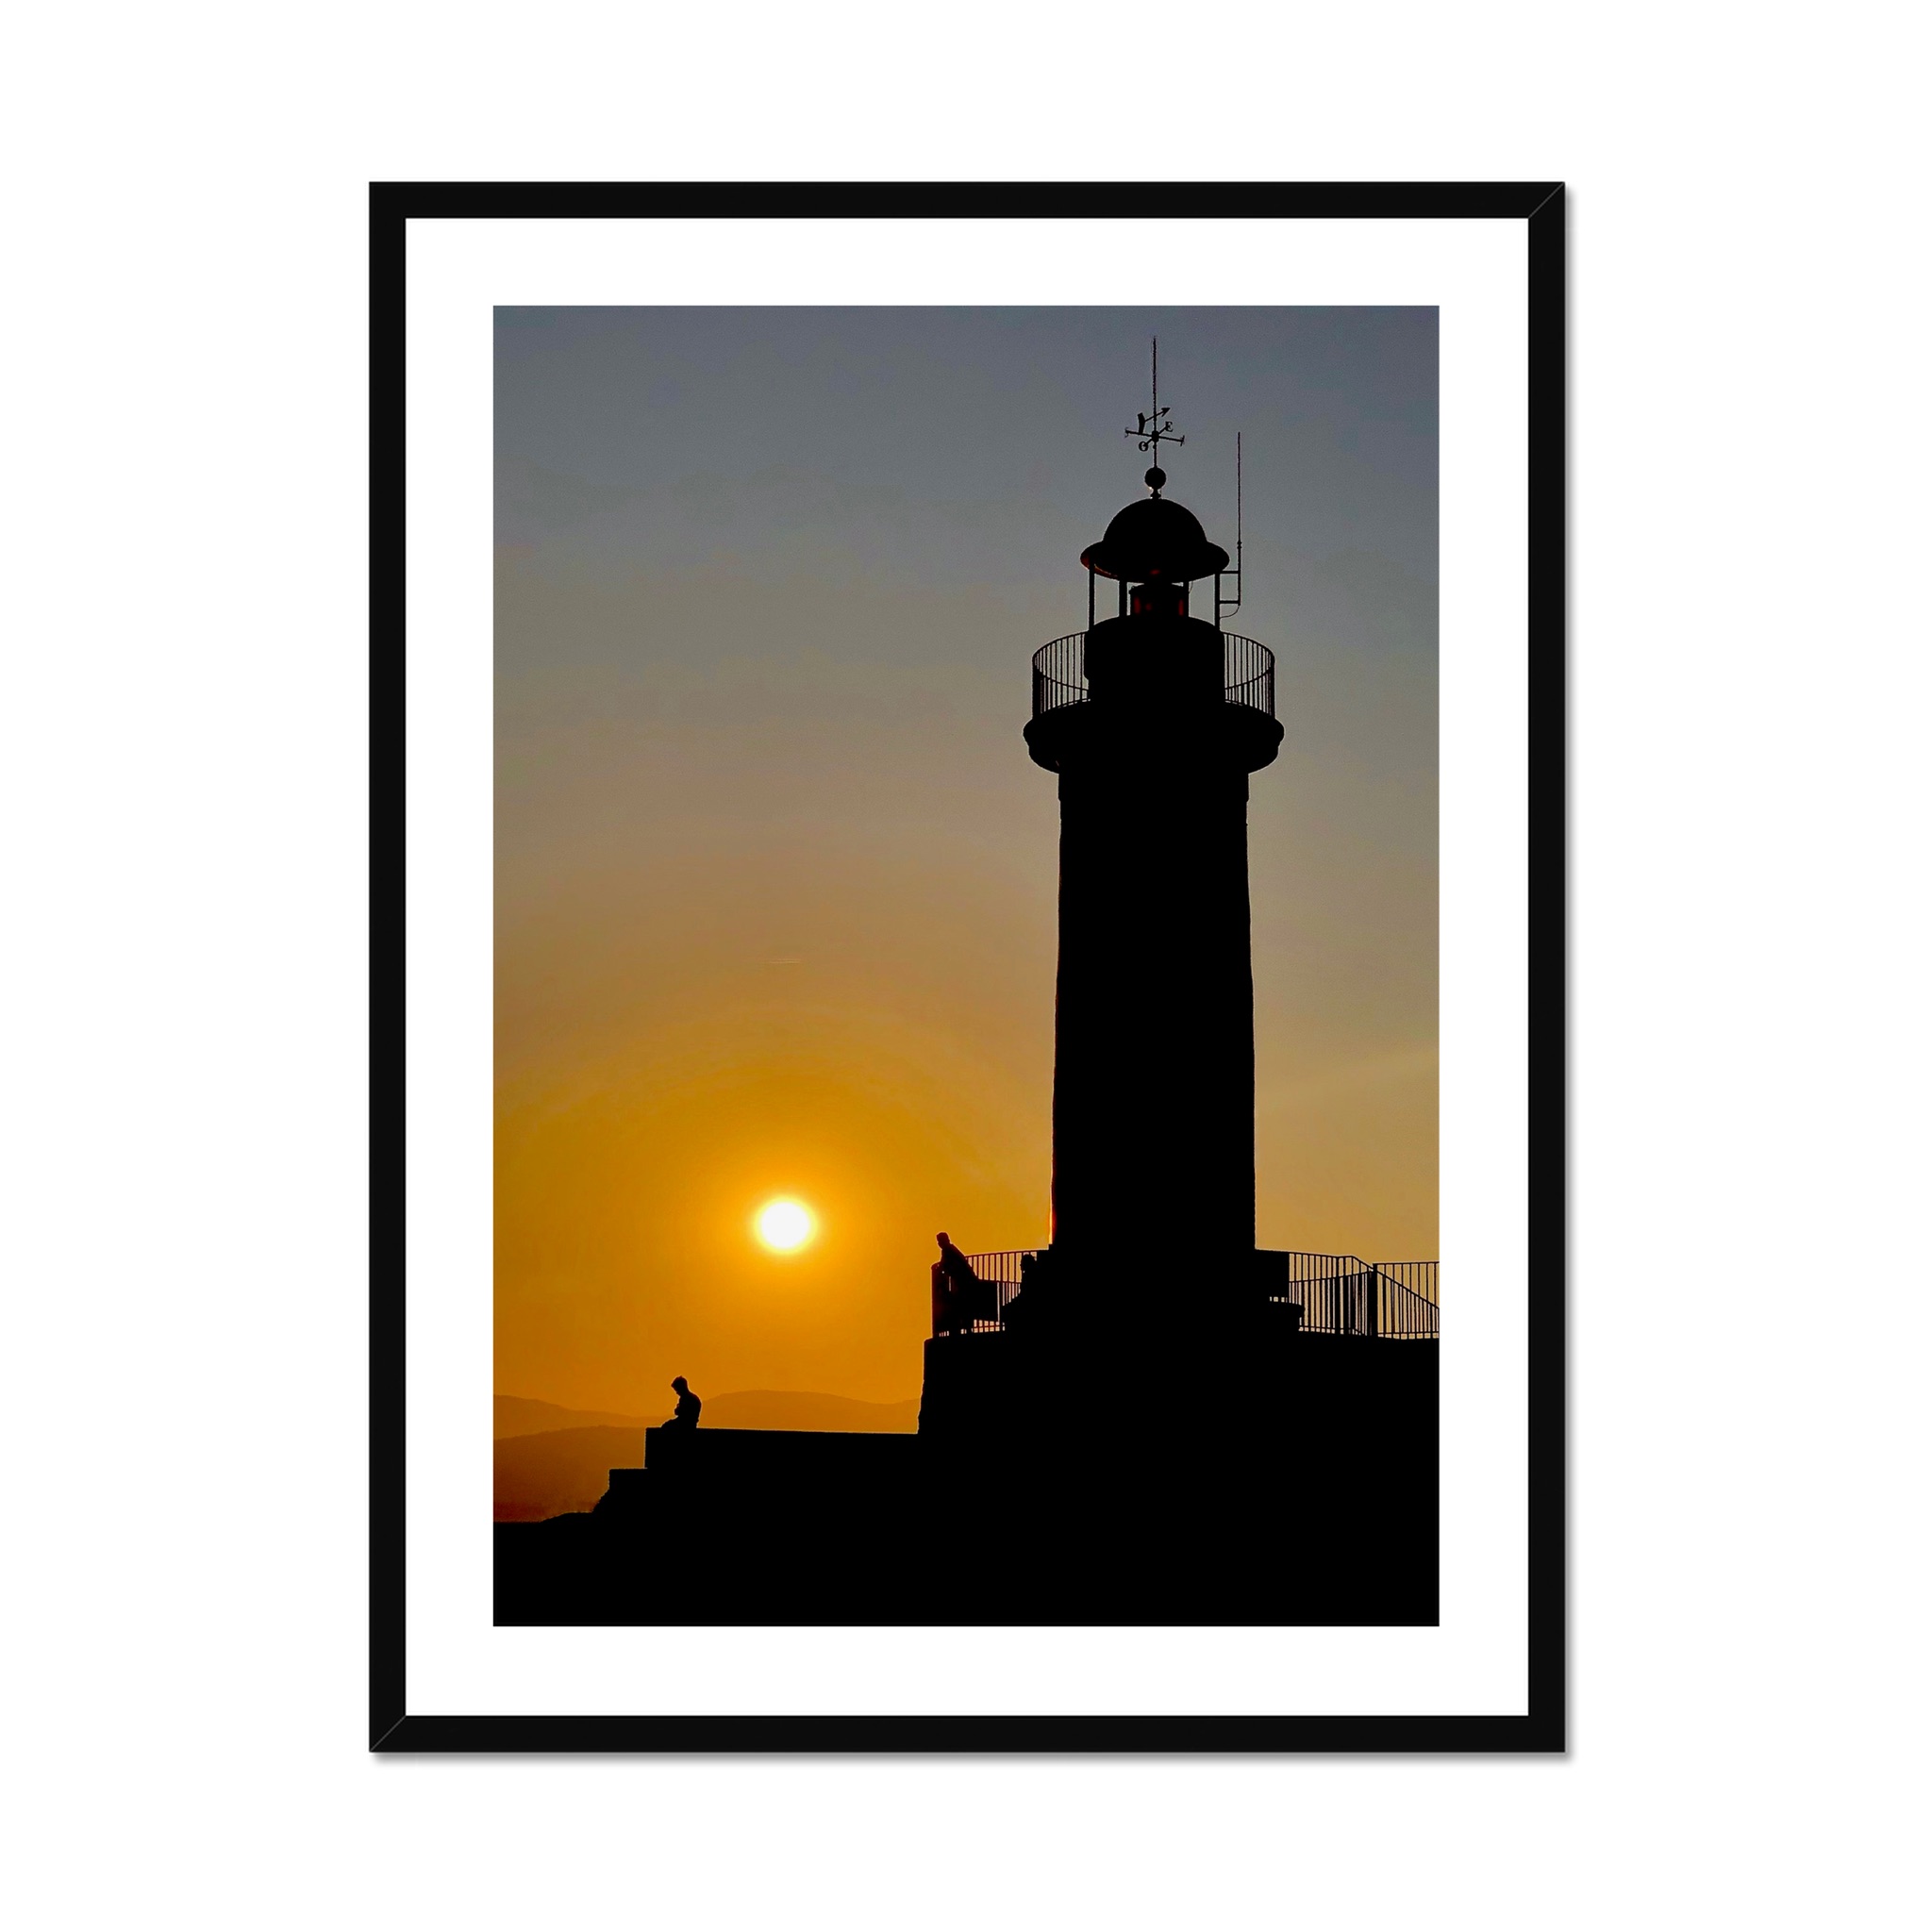 South of France Photos framed print - Lighthouse at sunset in Saint Tropez